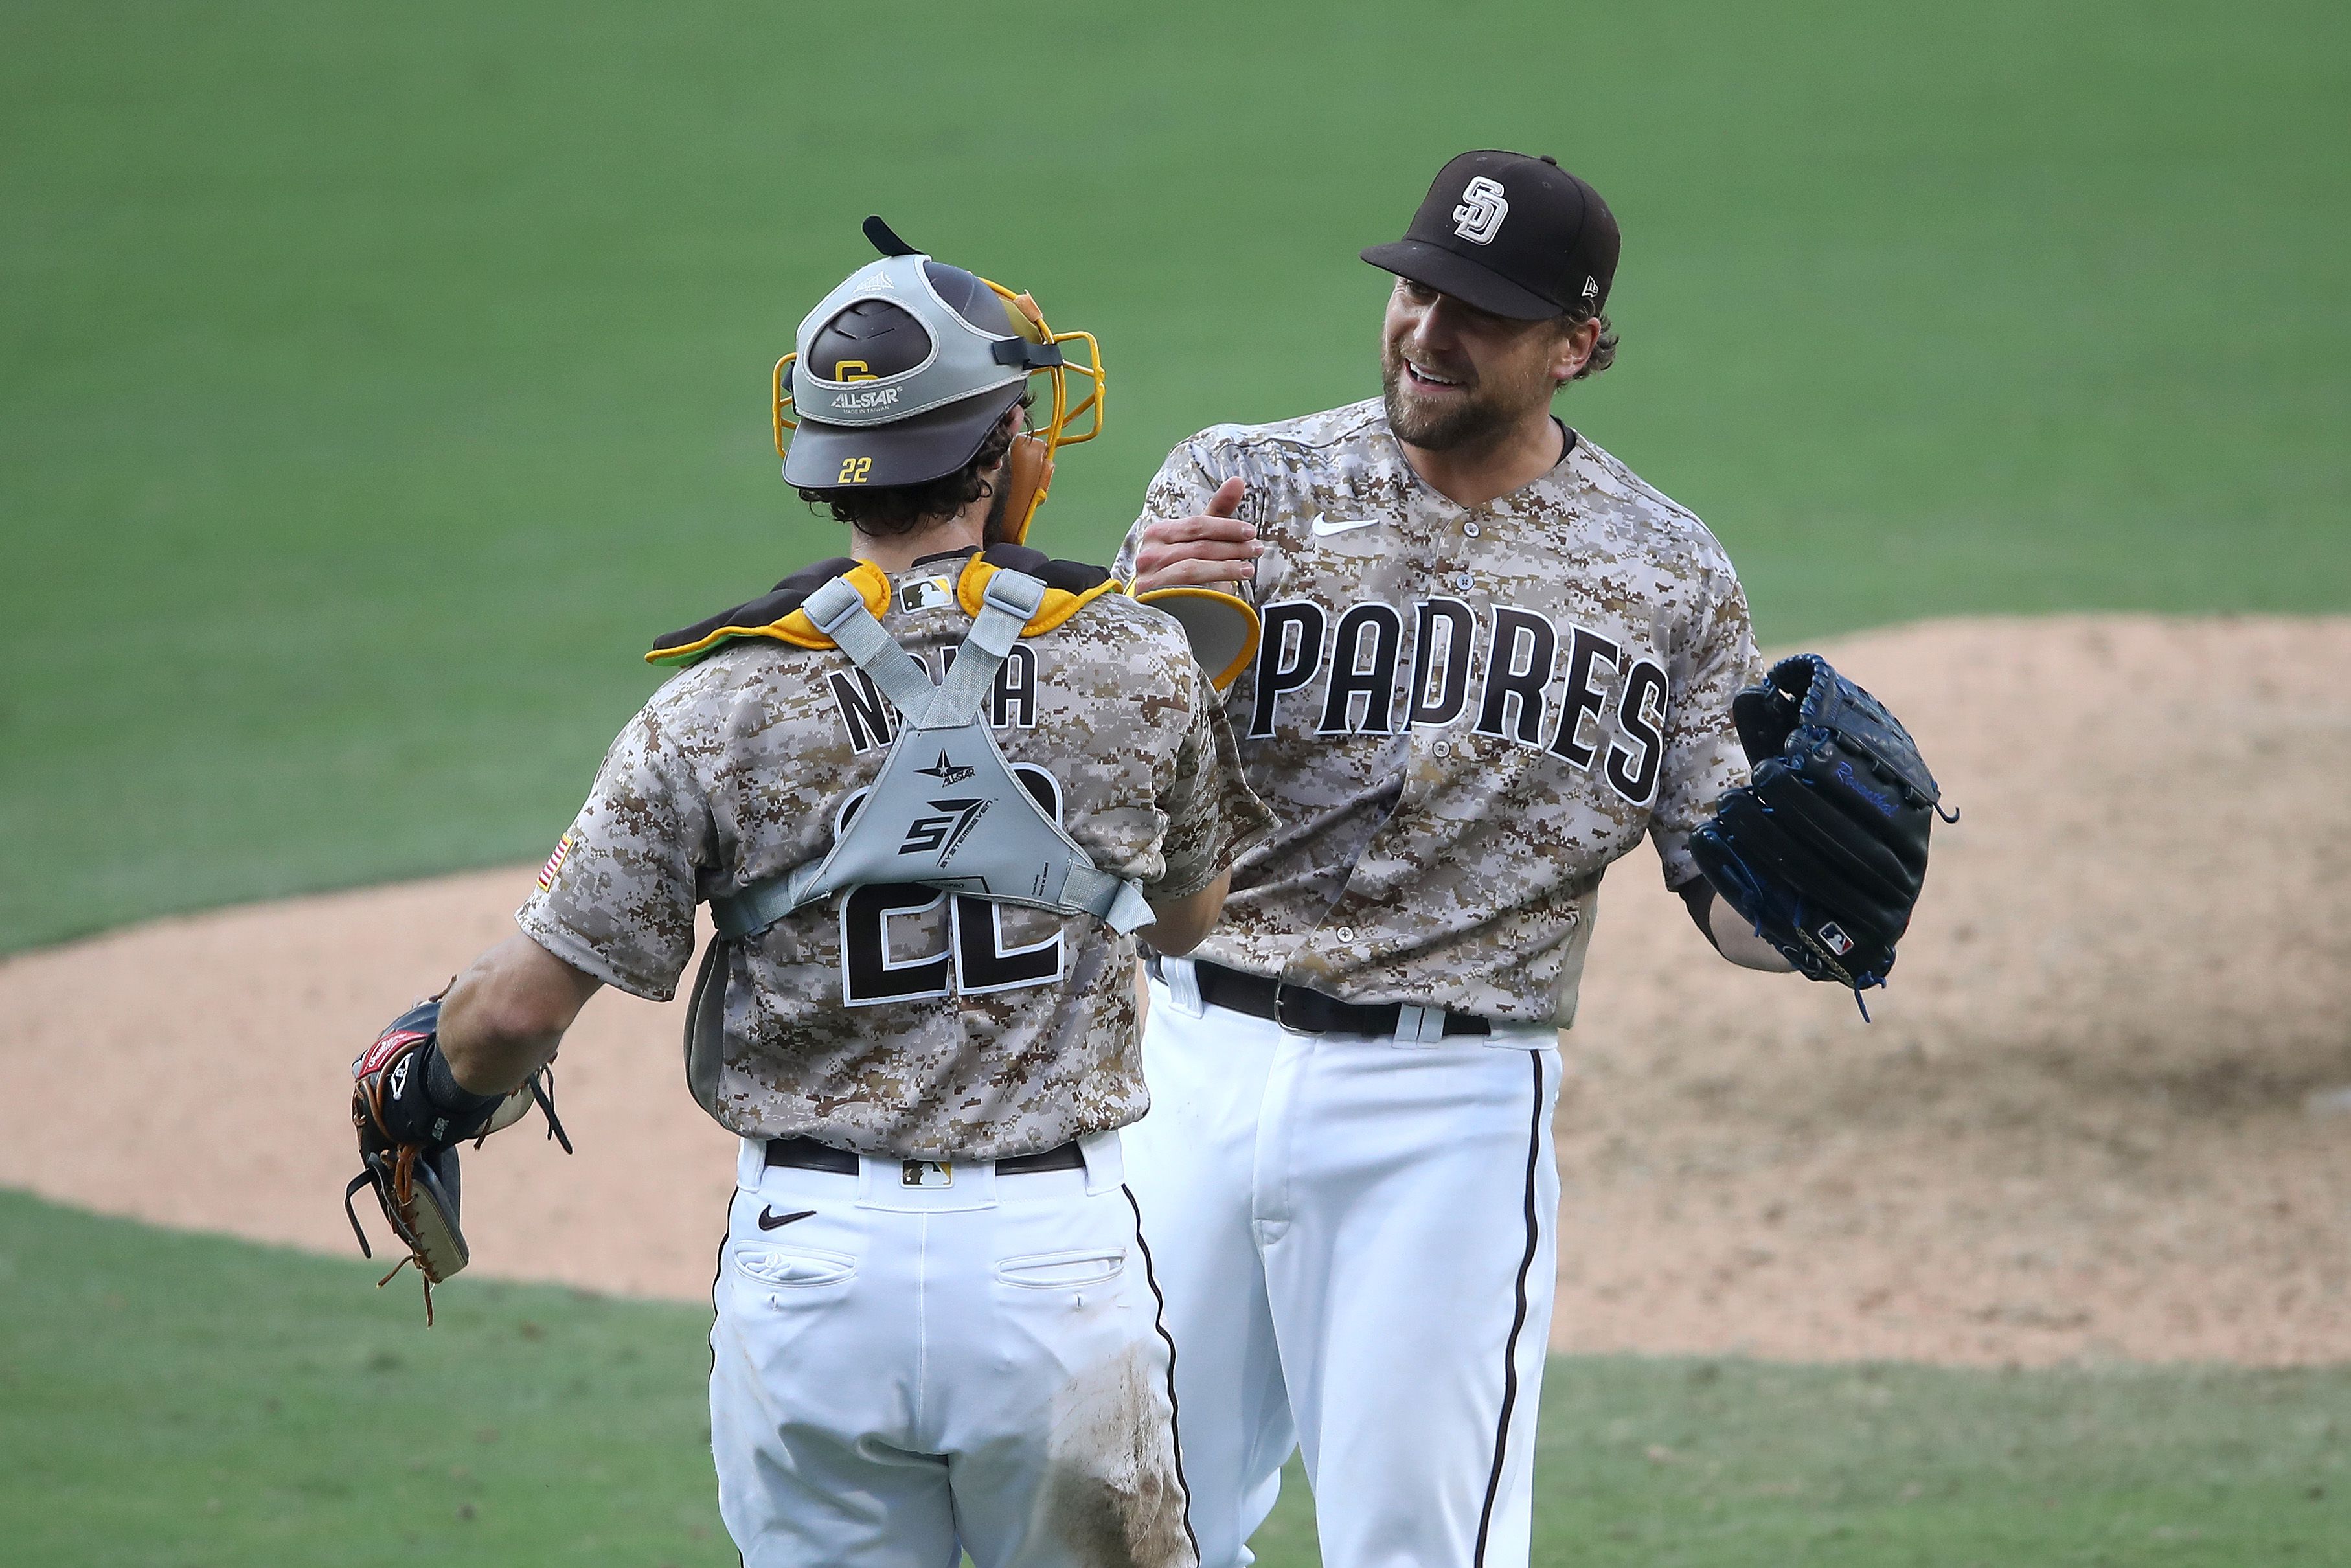 Padres take finale of NL West showdown